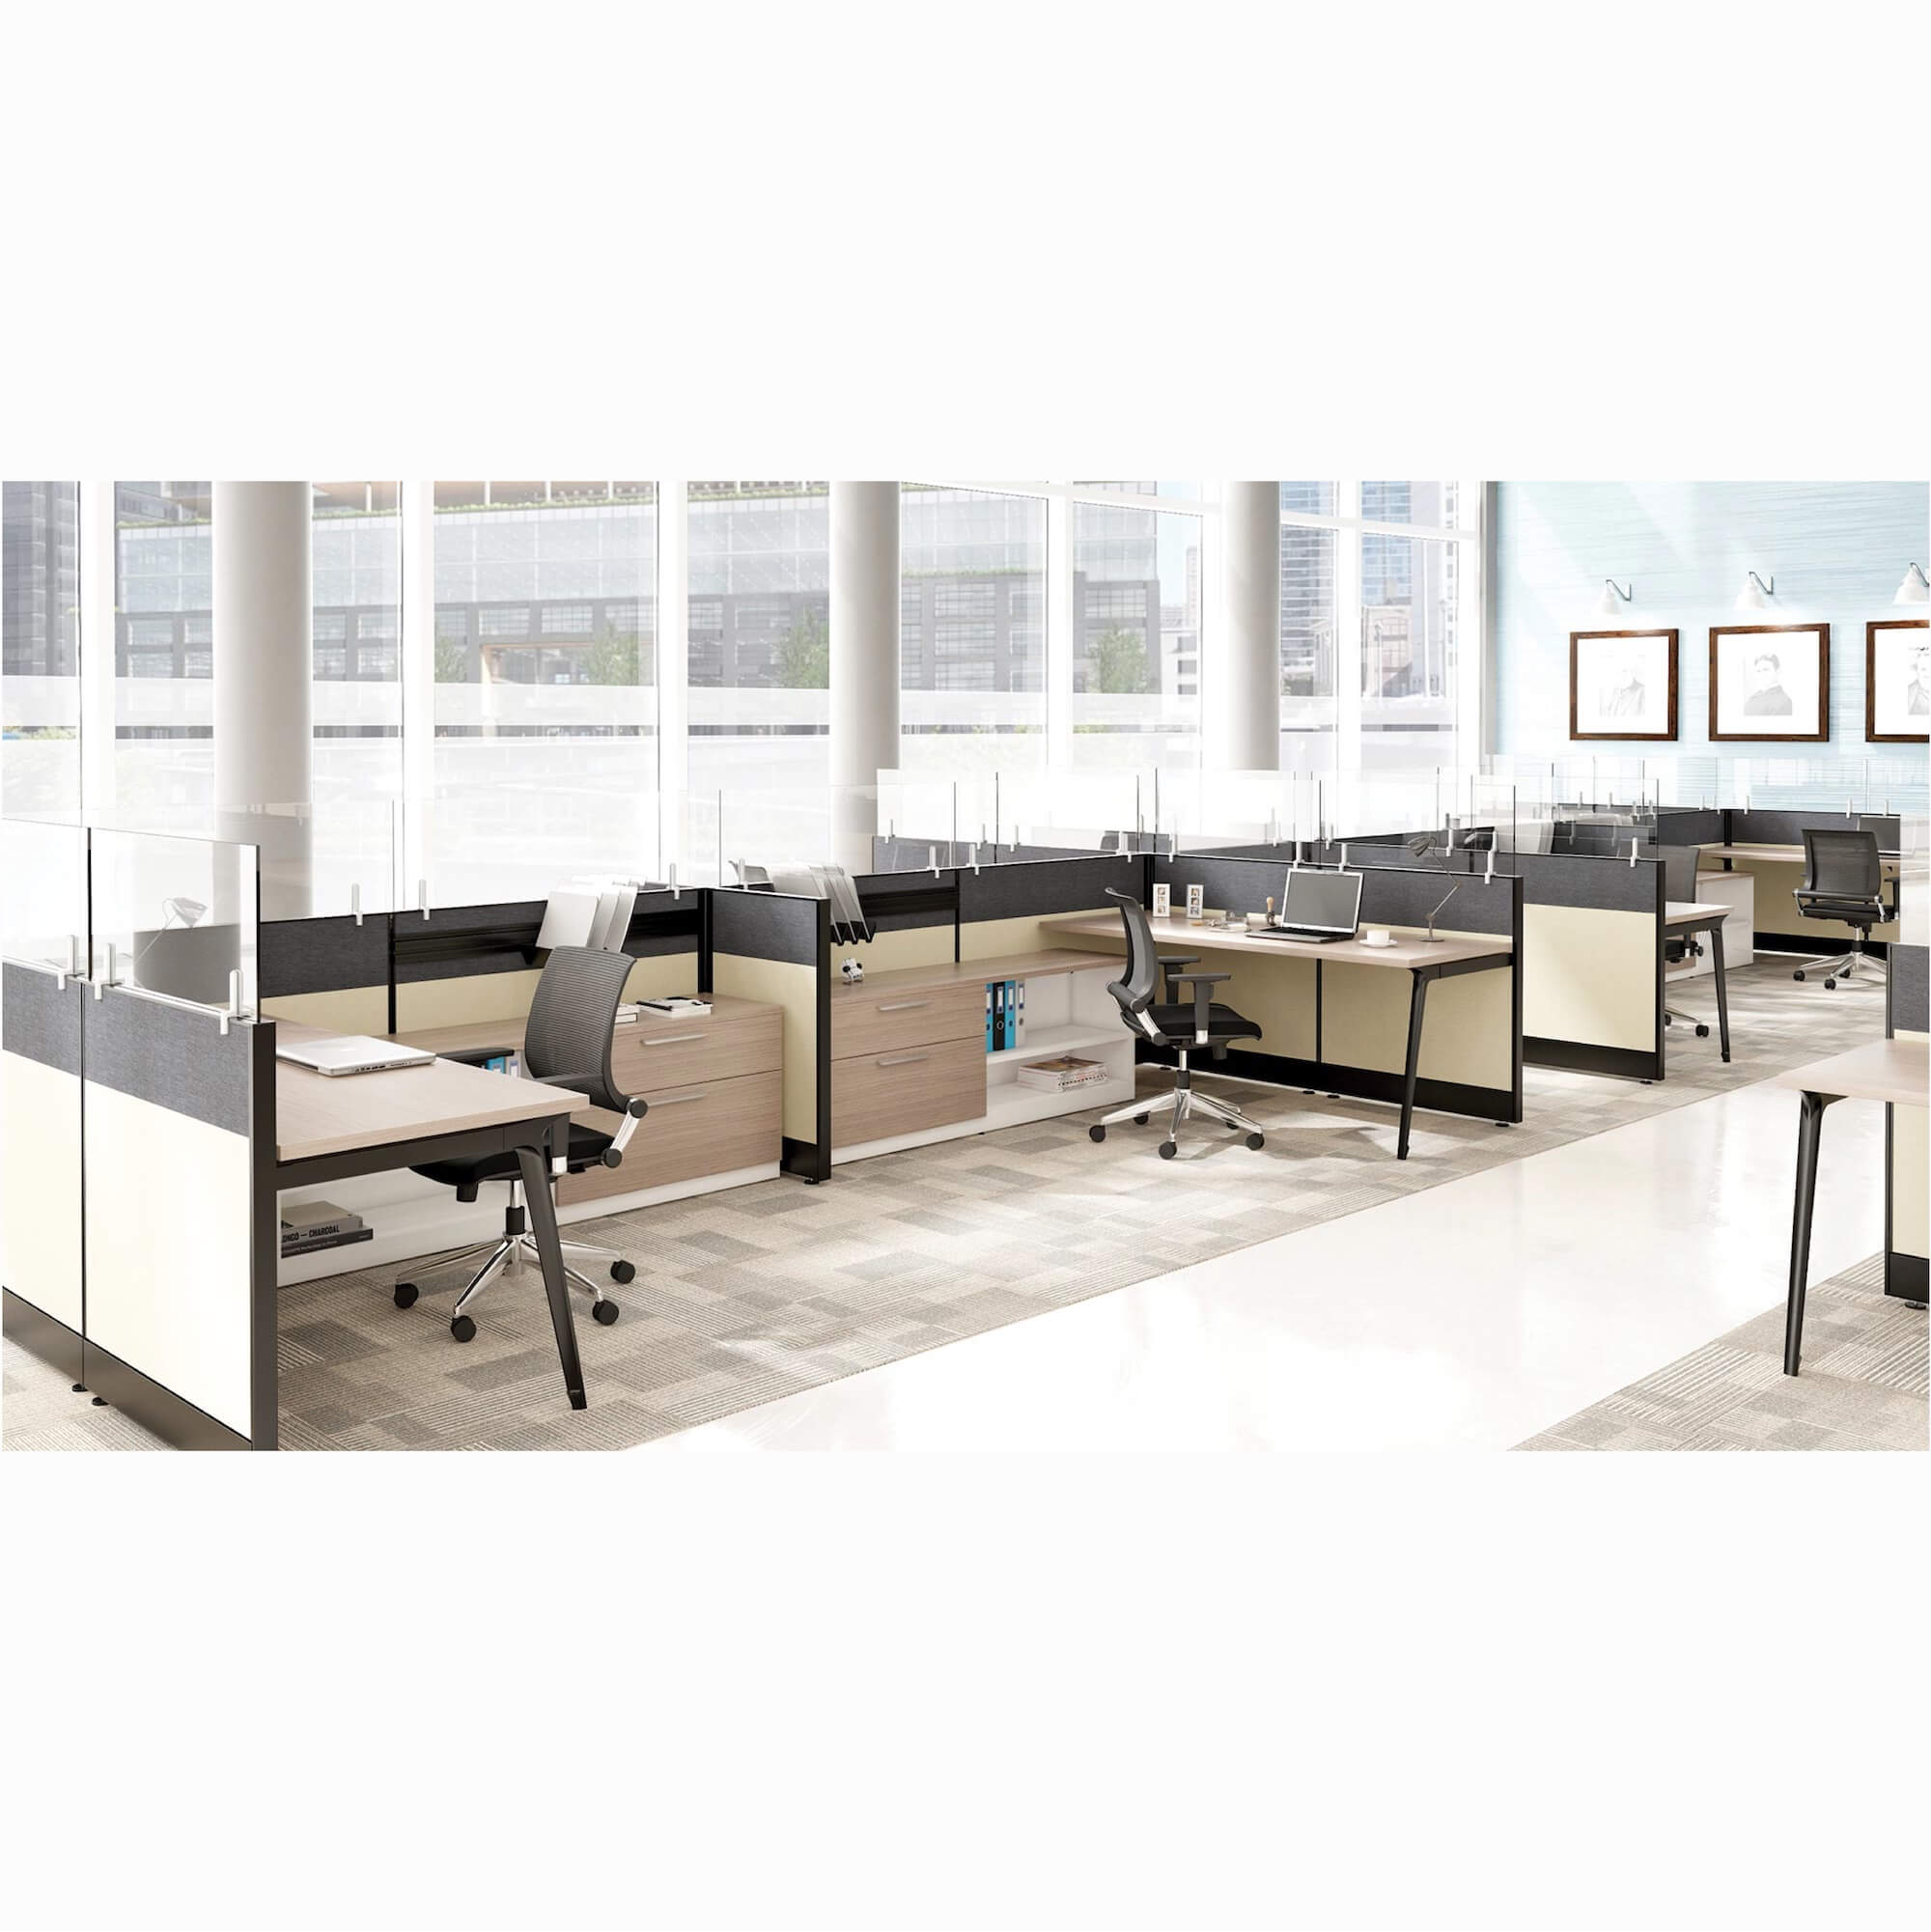 modern-cubicles-tapered-legs-overall-space-view-0.jpg